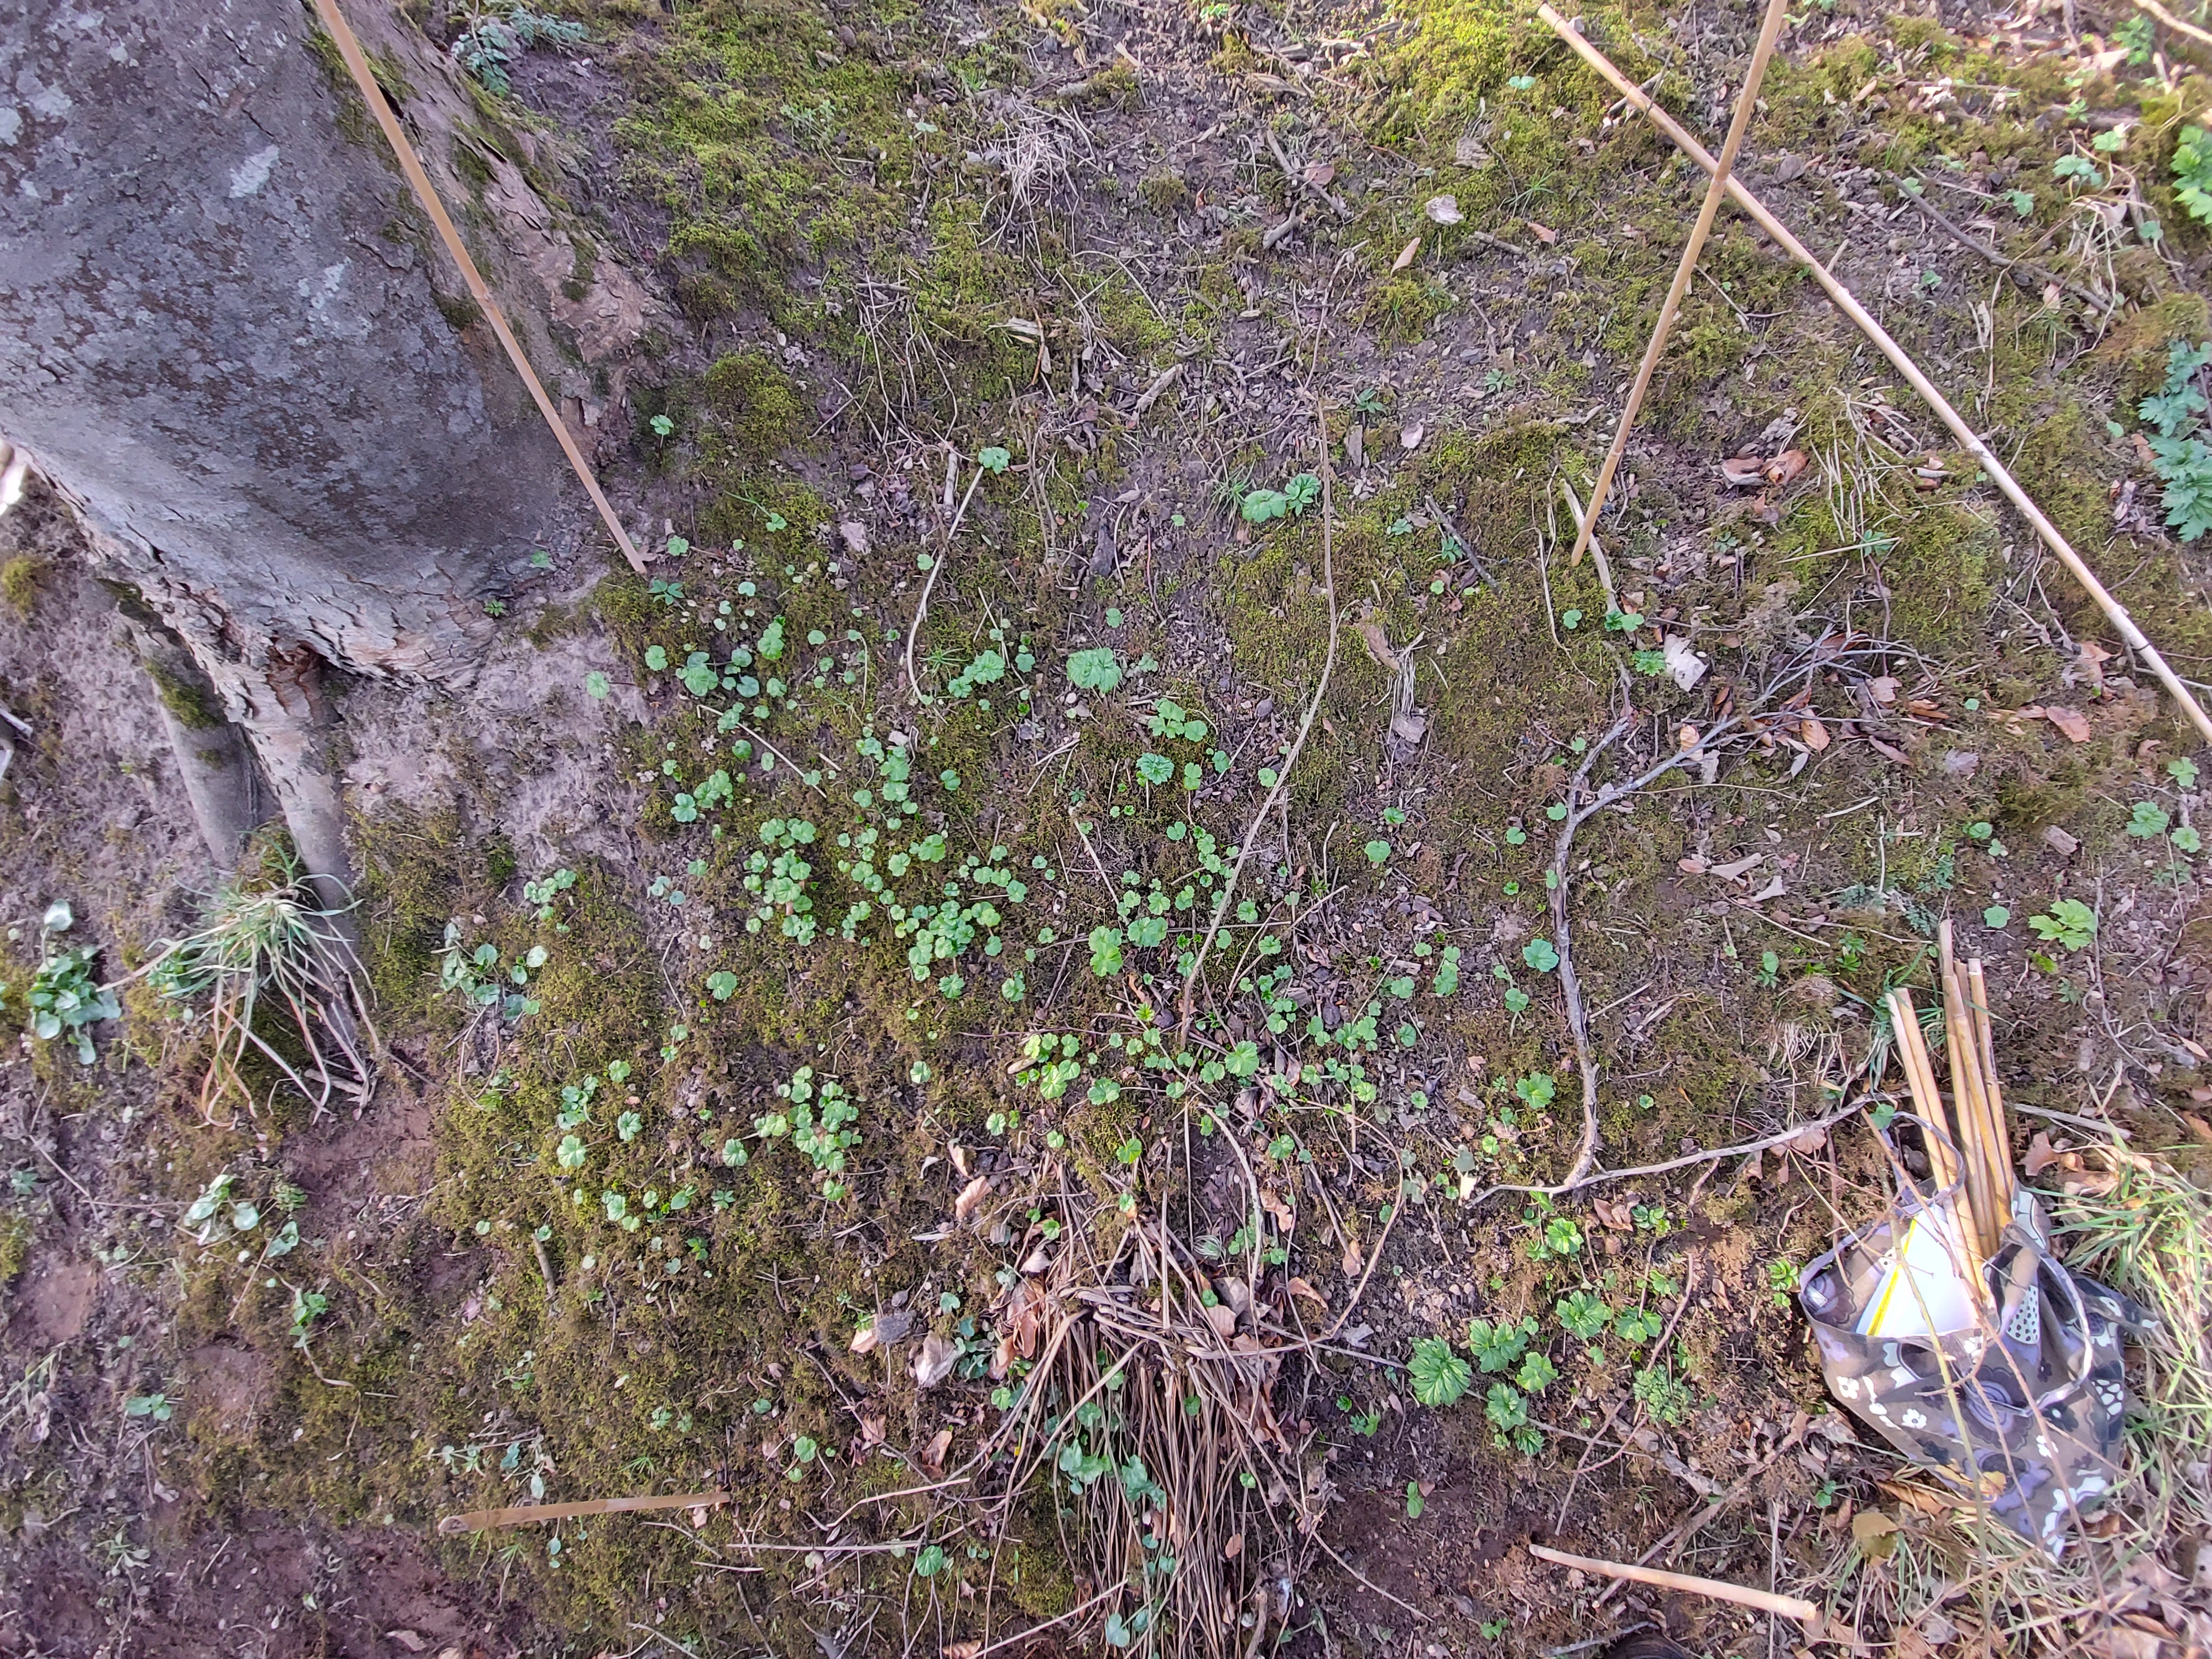 Example of seedlings in a plot in march - some visible but not many